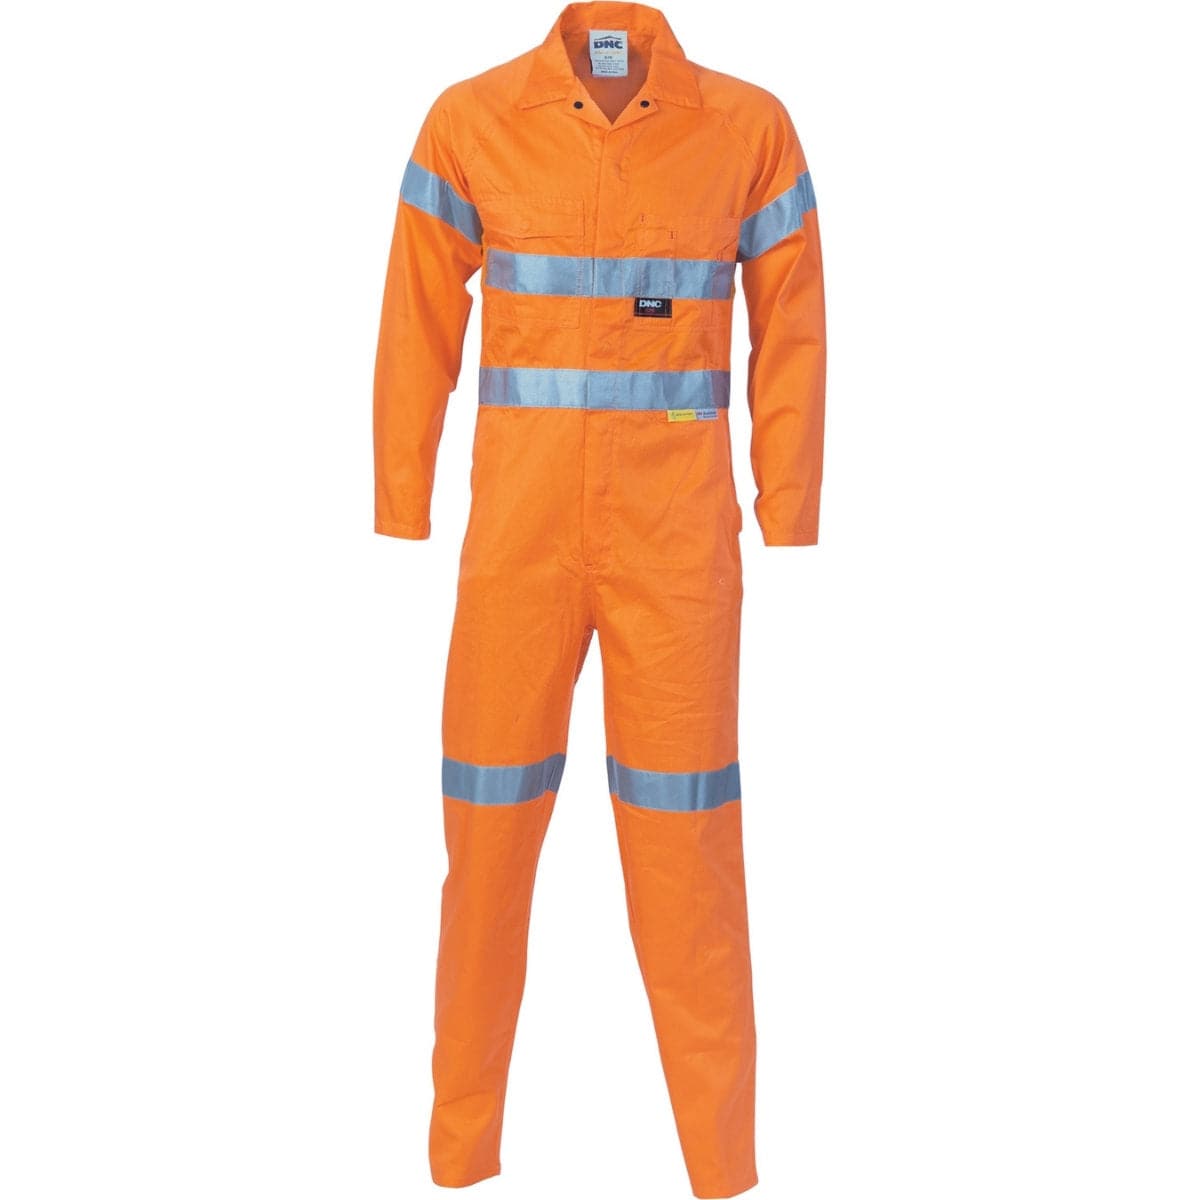 DNC HiVis Cool-Breeze Orange Lightweight Cotton Coverall with 3M R/Tape 3956